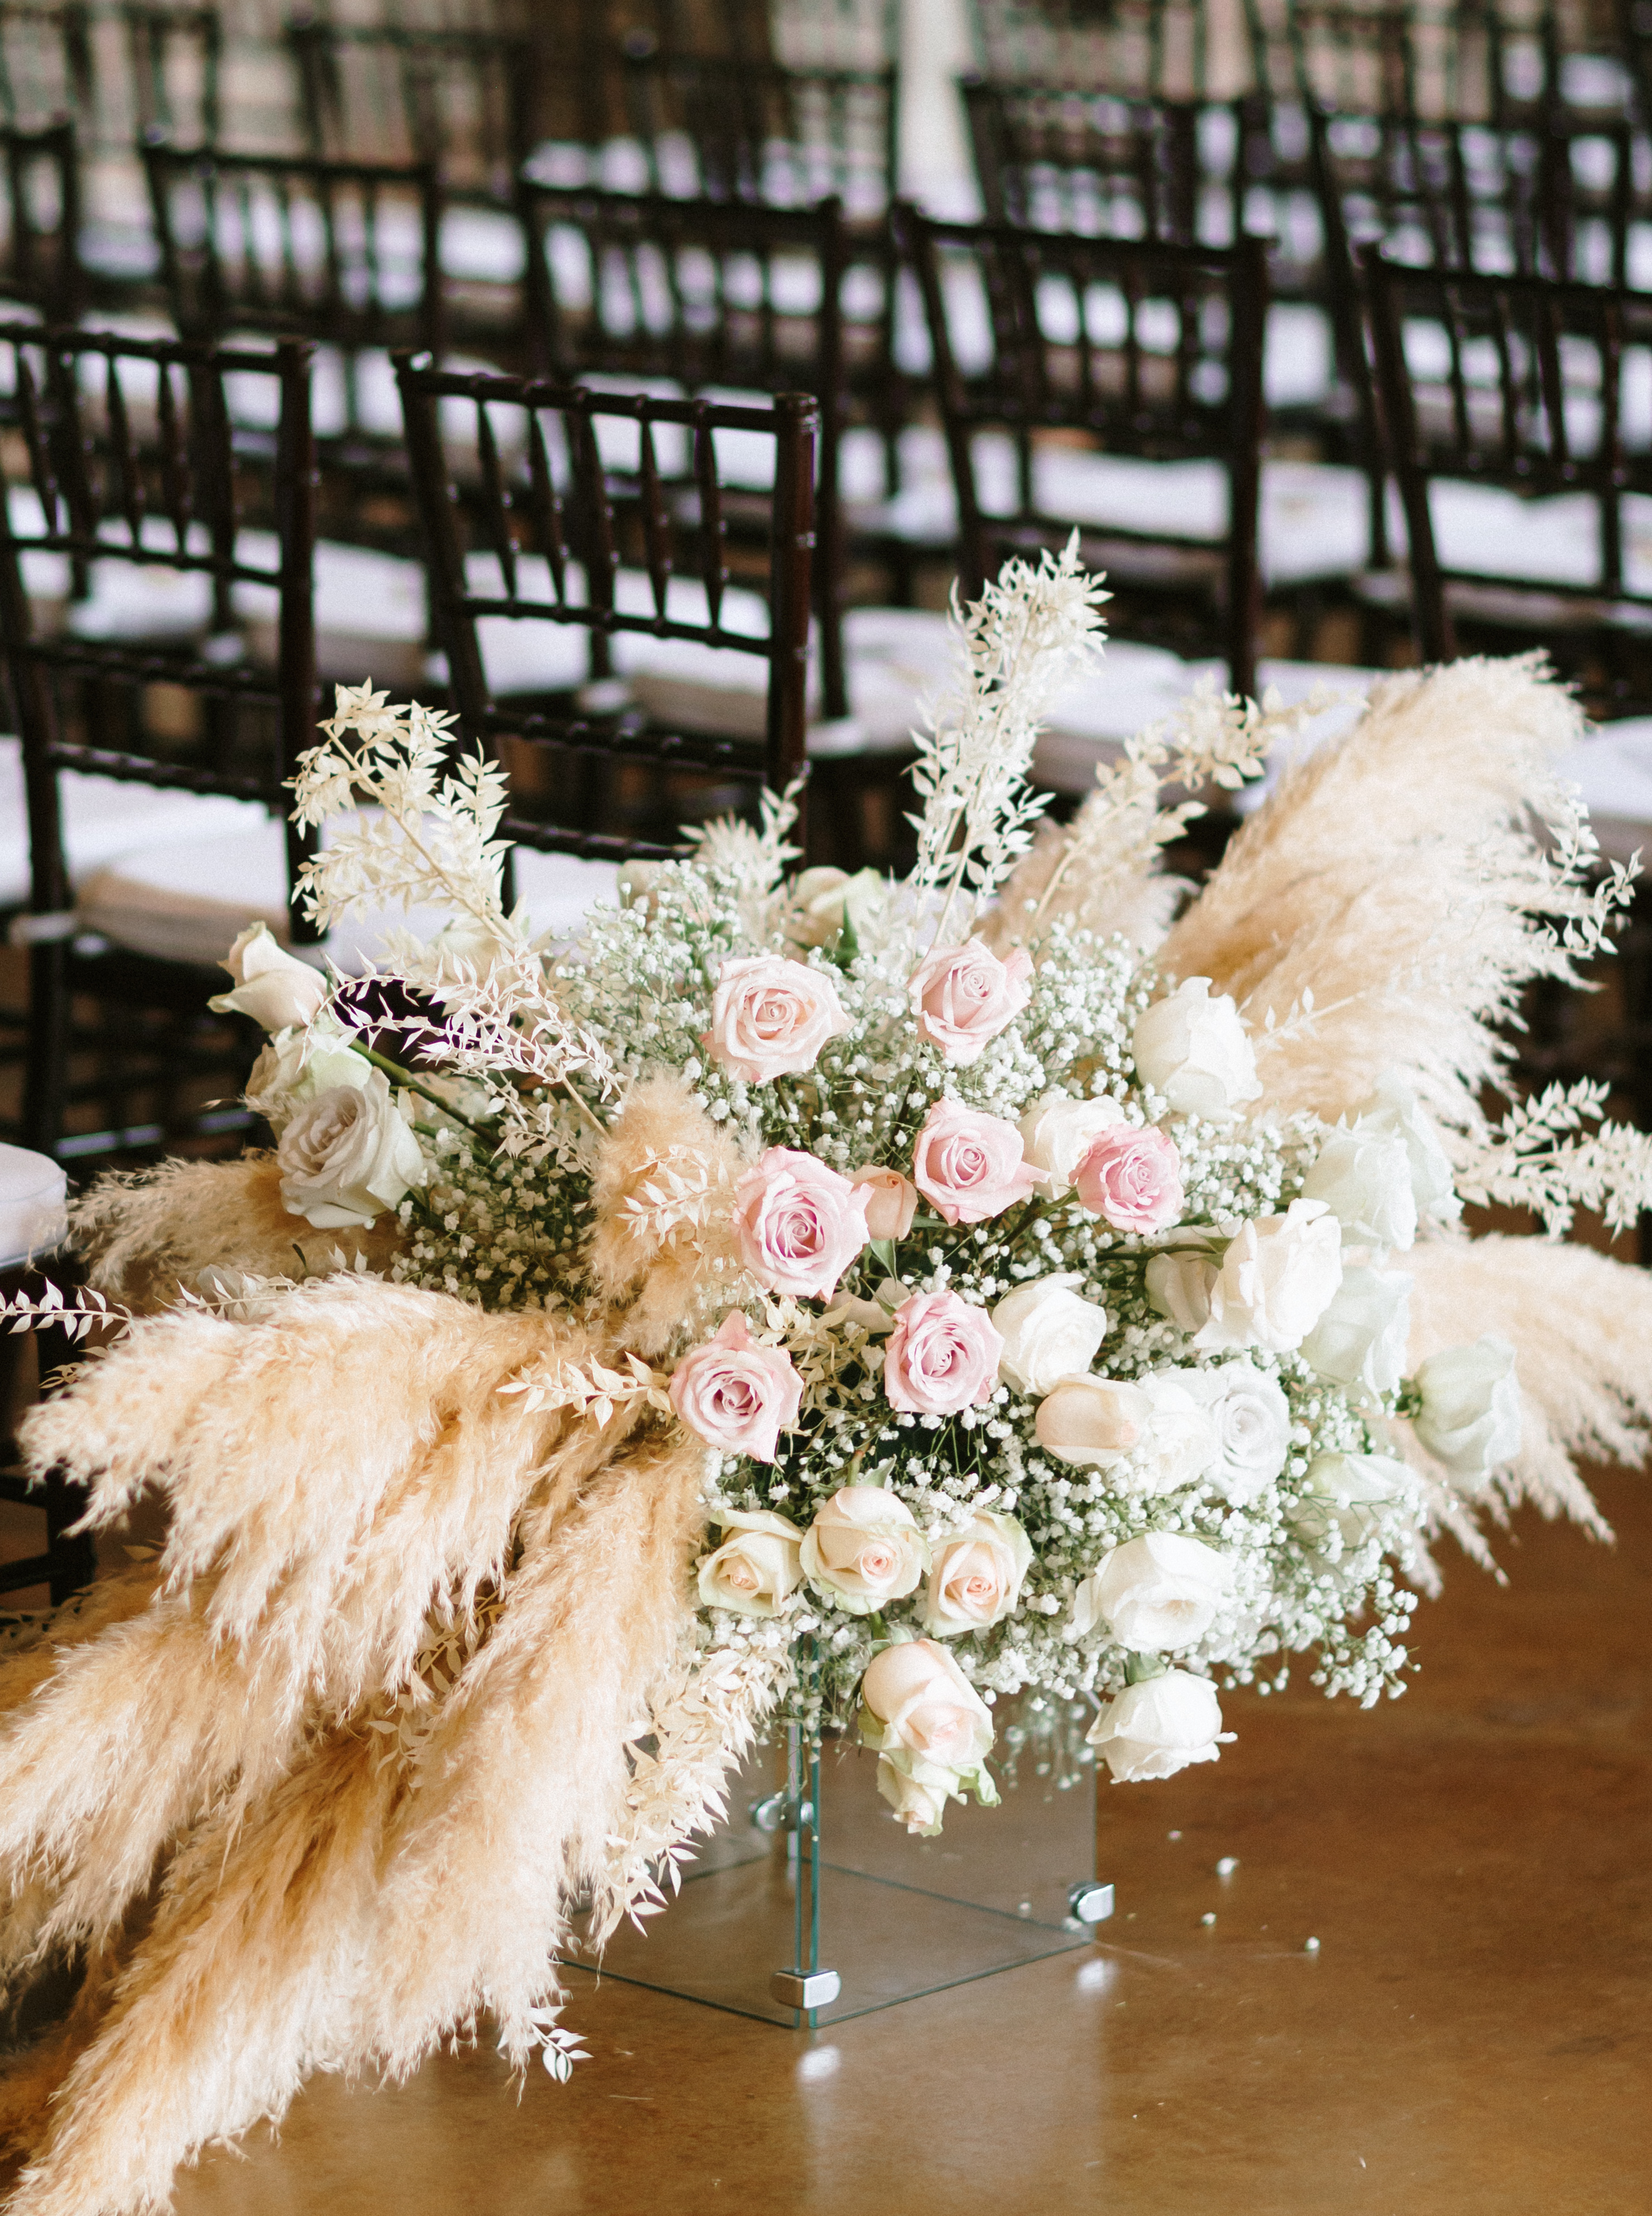 A flower arrangement full of blush pink flowers and pampas grass is set up in one of the aisles for a wedding ceremony in Montgomery, TX.